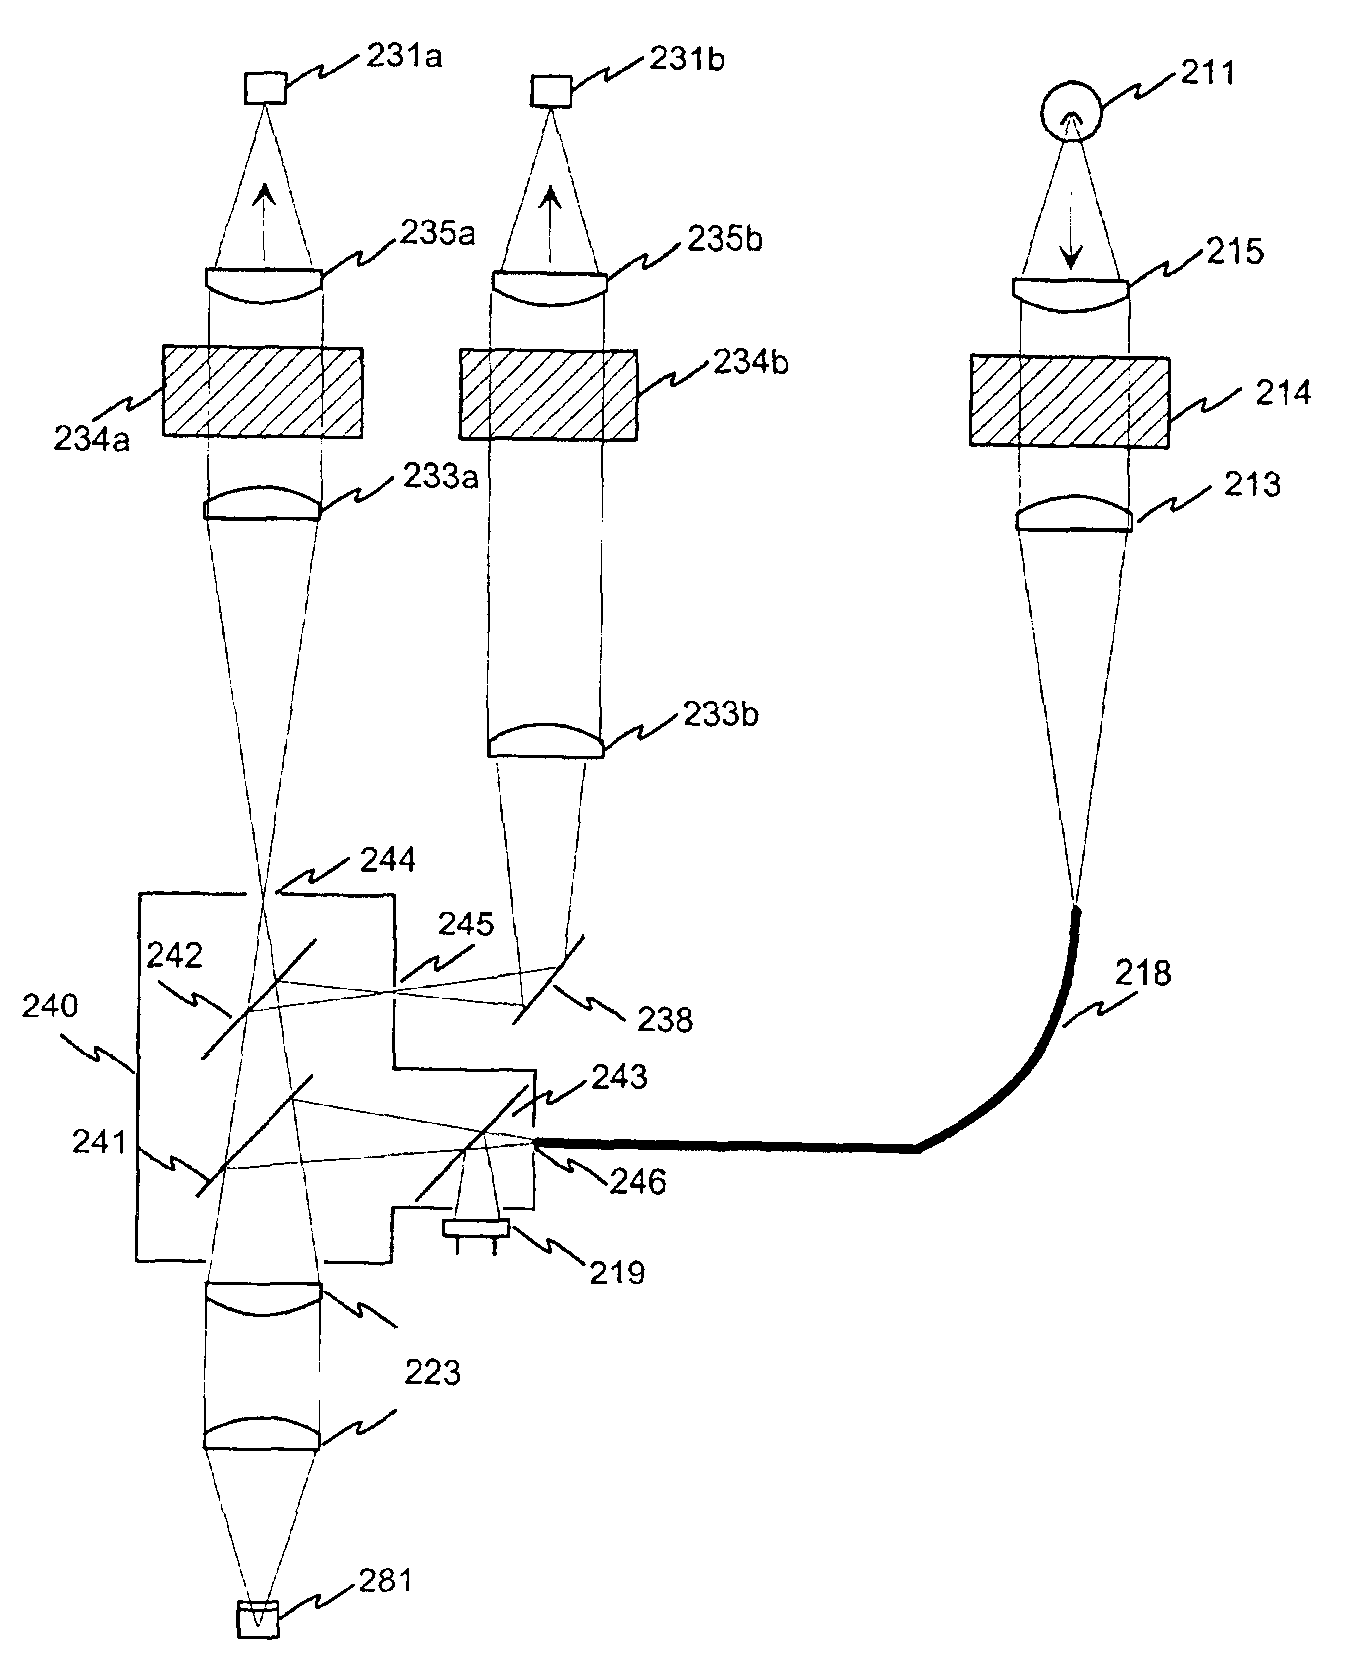 Optical instrument and process for measurement of samples